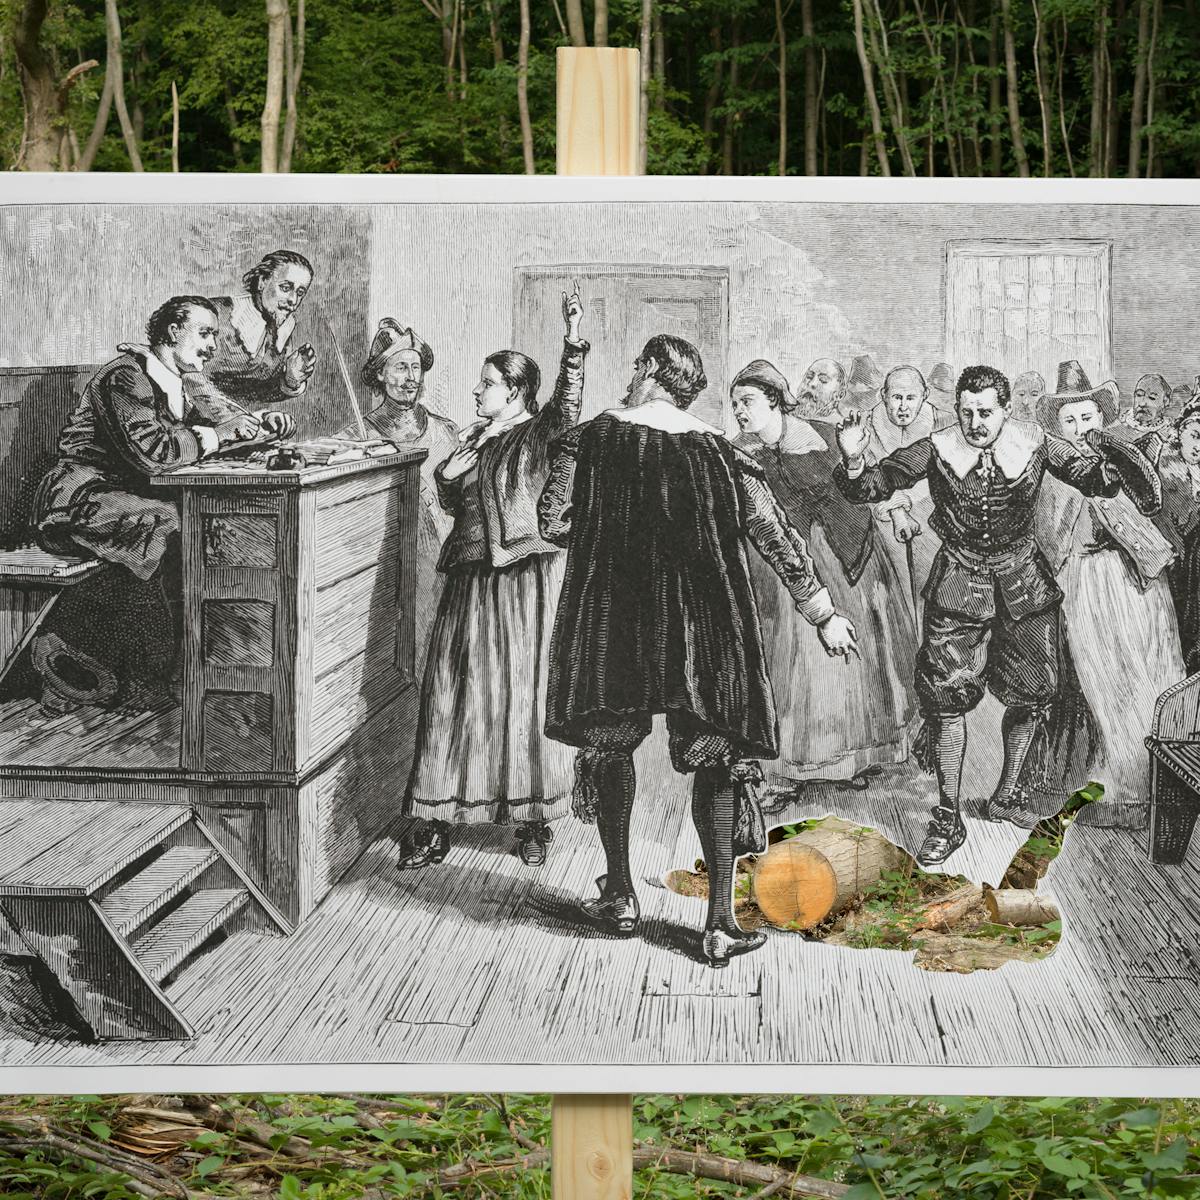 An etching of a courtroom photographed in front of a landscape featuring a forest in the background. The plaintiff in the courtroom is cut out and the landscape is shown through the aperture.